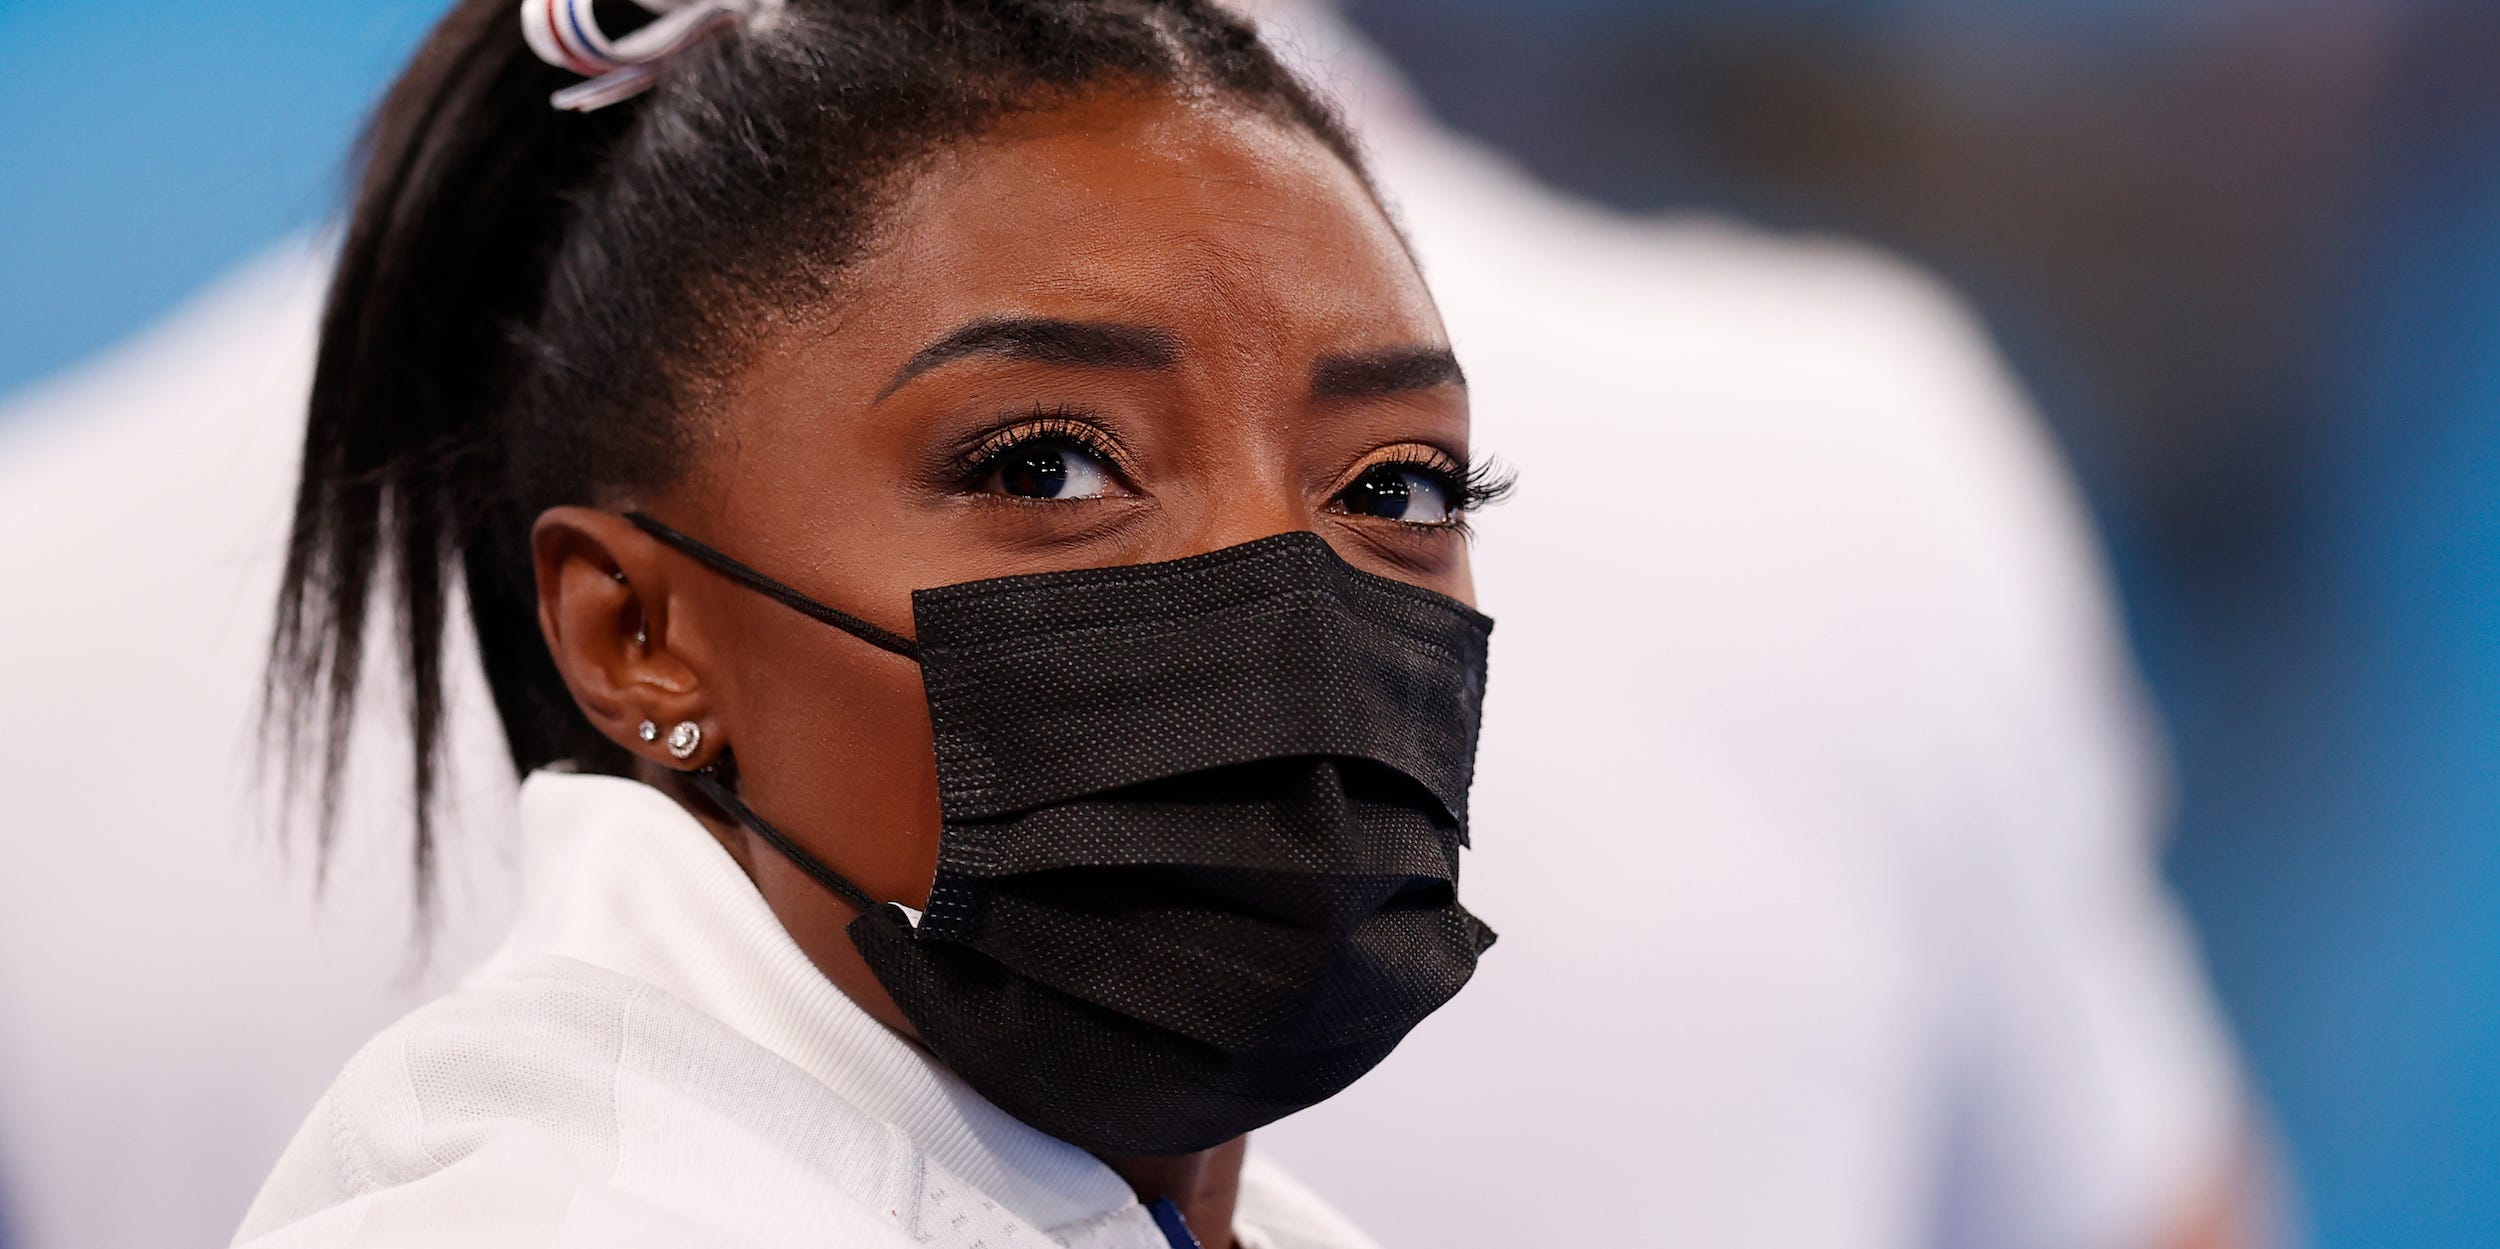 Simone Biles of Team United States looks on during the Women's Team Final on day four of the Tokyo 2020 Olympic Games at Ariake Gymnastics Centre on July 27, 2021 in Tokyo, Japan.(